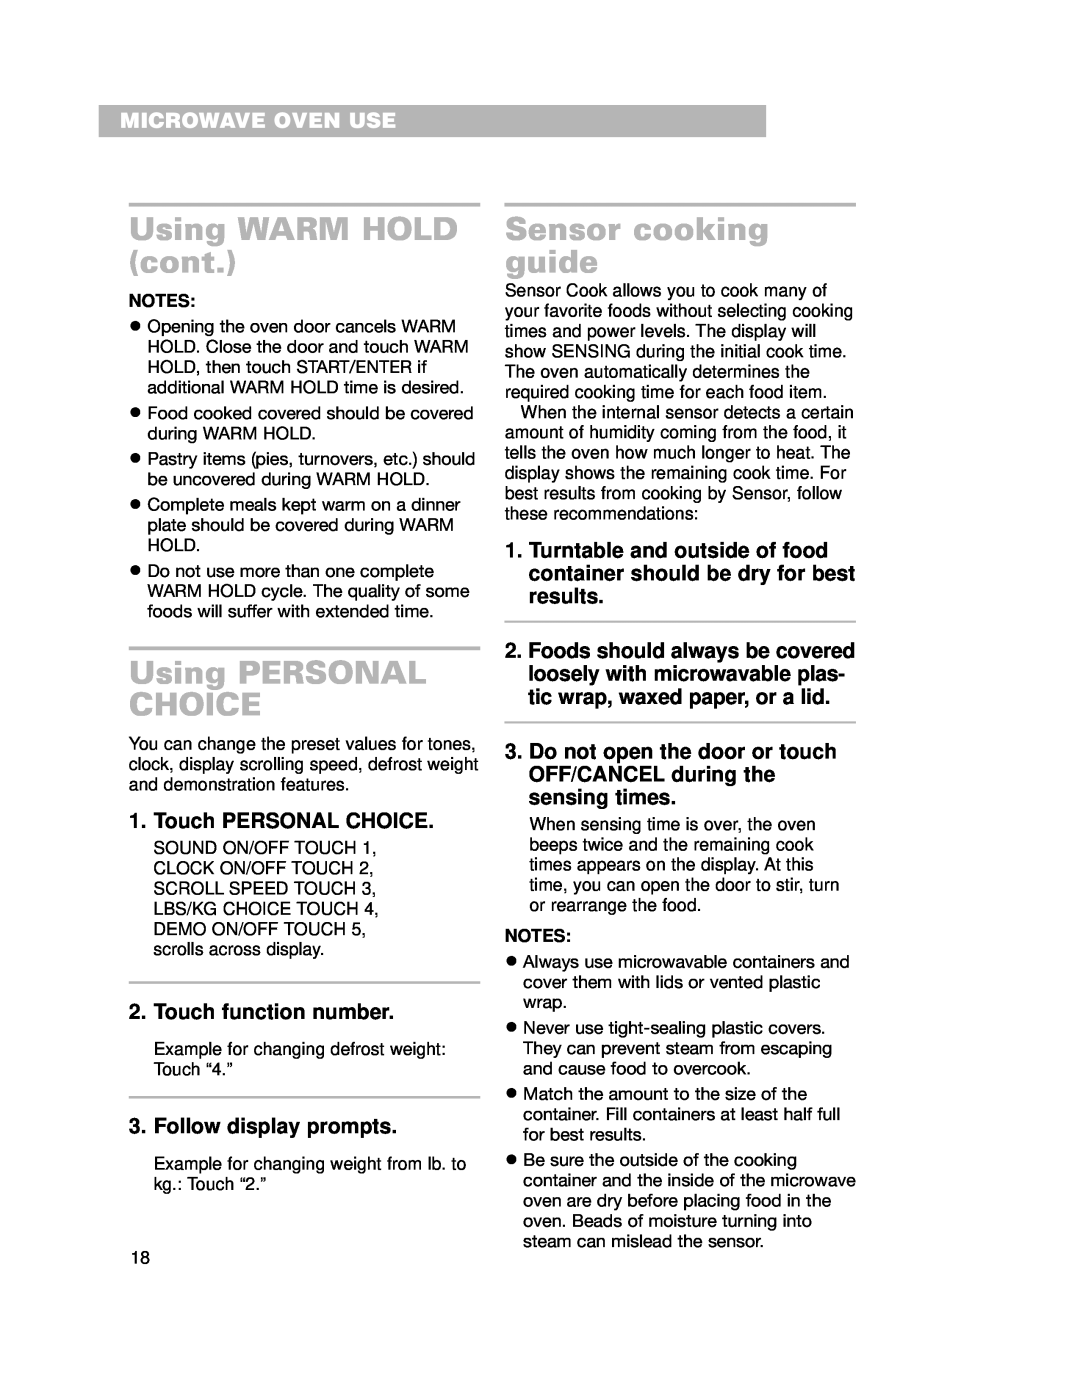 Whirlpool GH7155XKQ warranty Using WARM HOLD cont, Using PERSONAL CHOICE, Sensor cooking guide, Touch PERSONAL CHOICE 